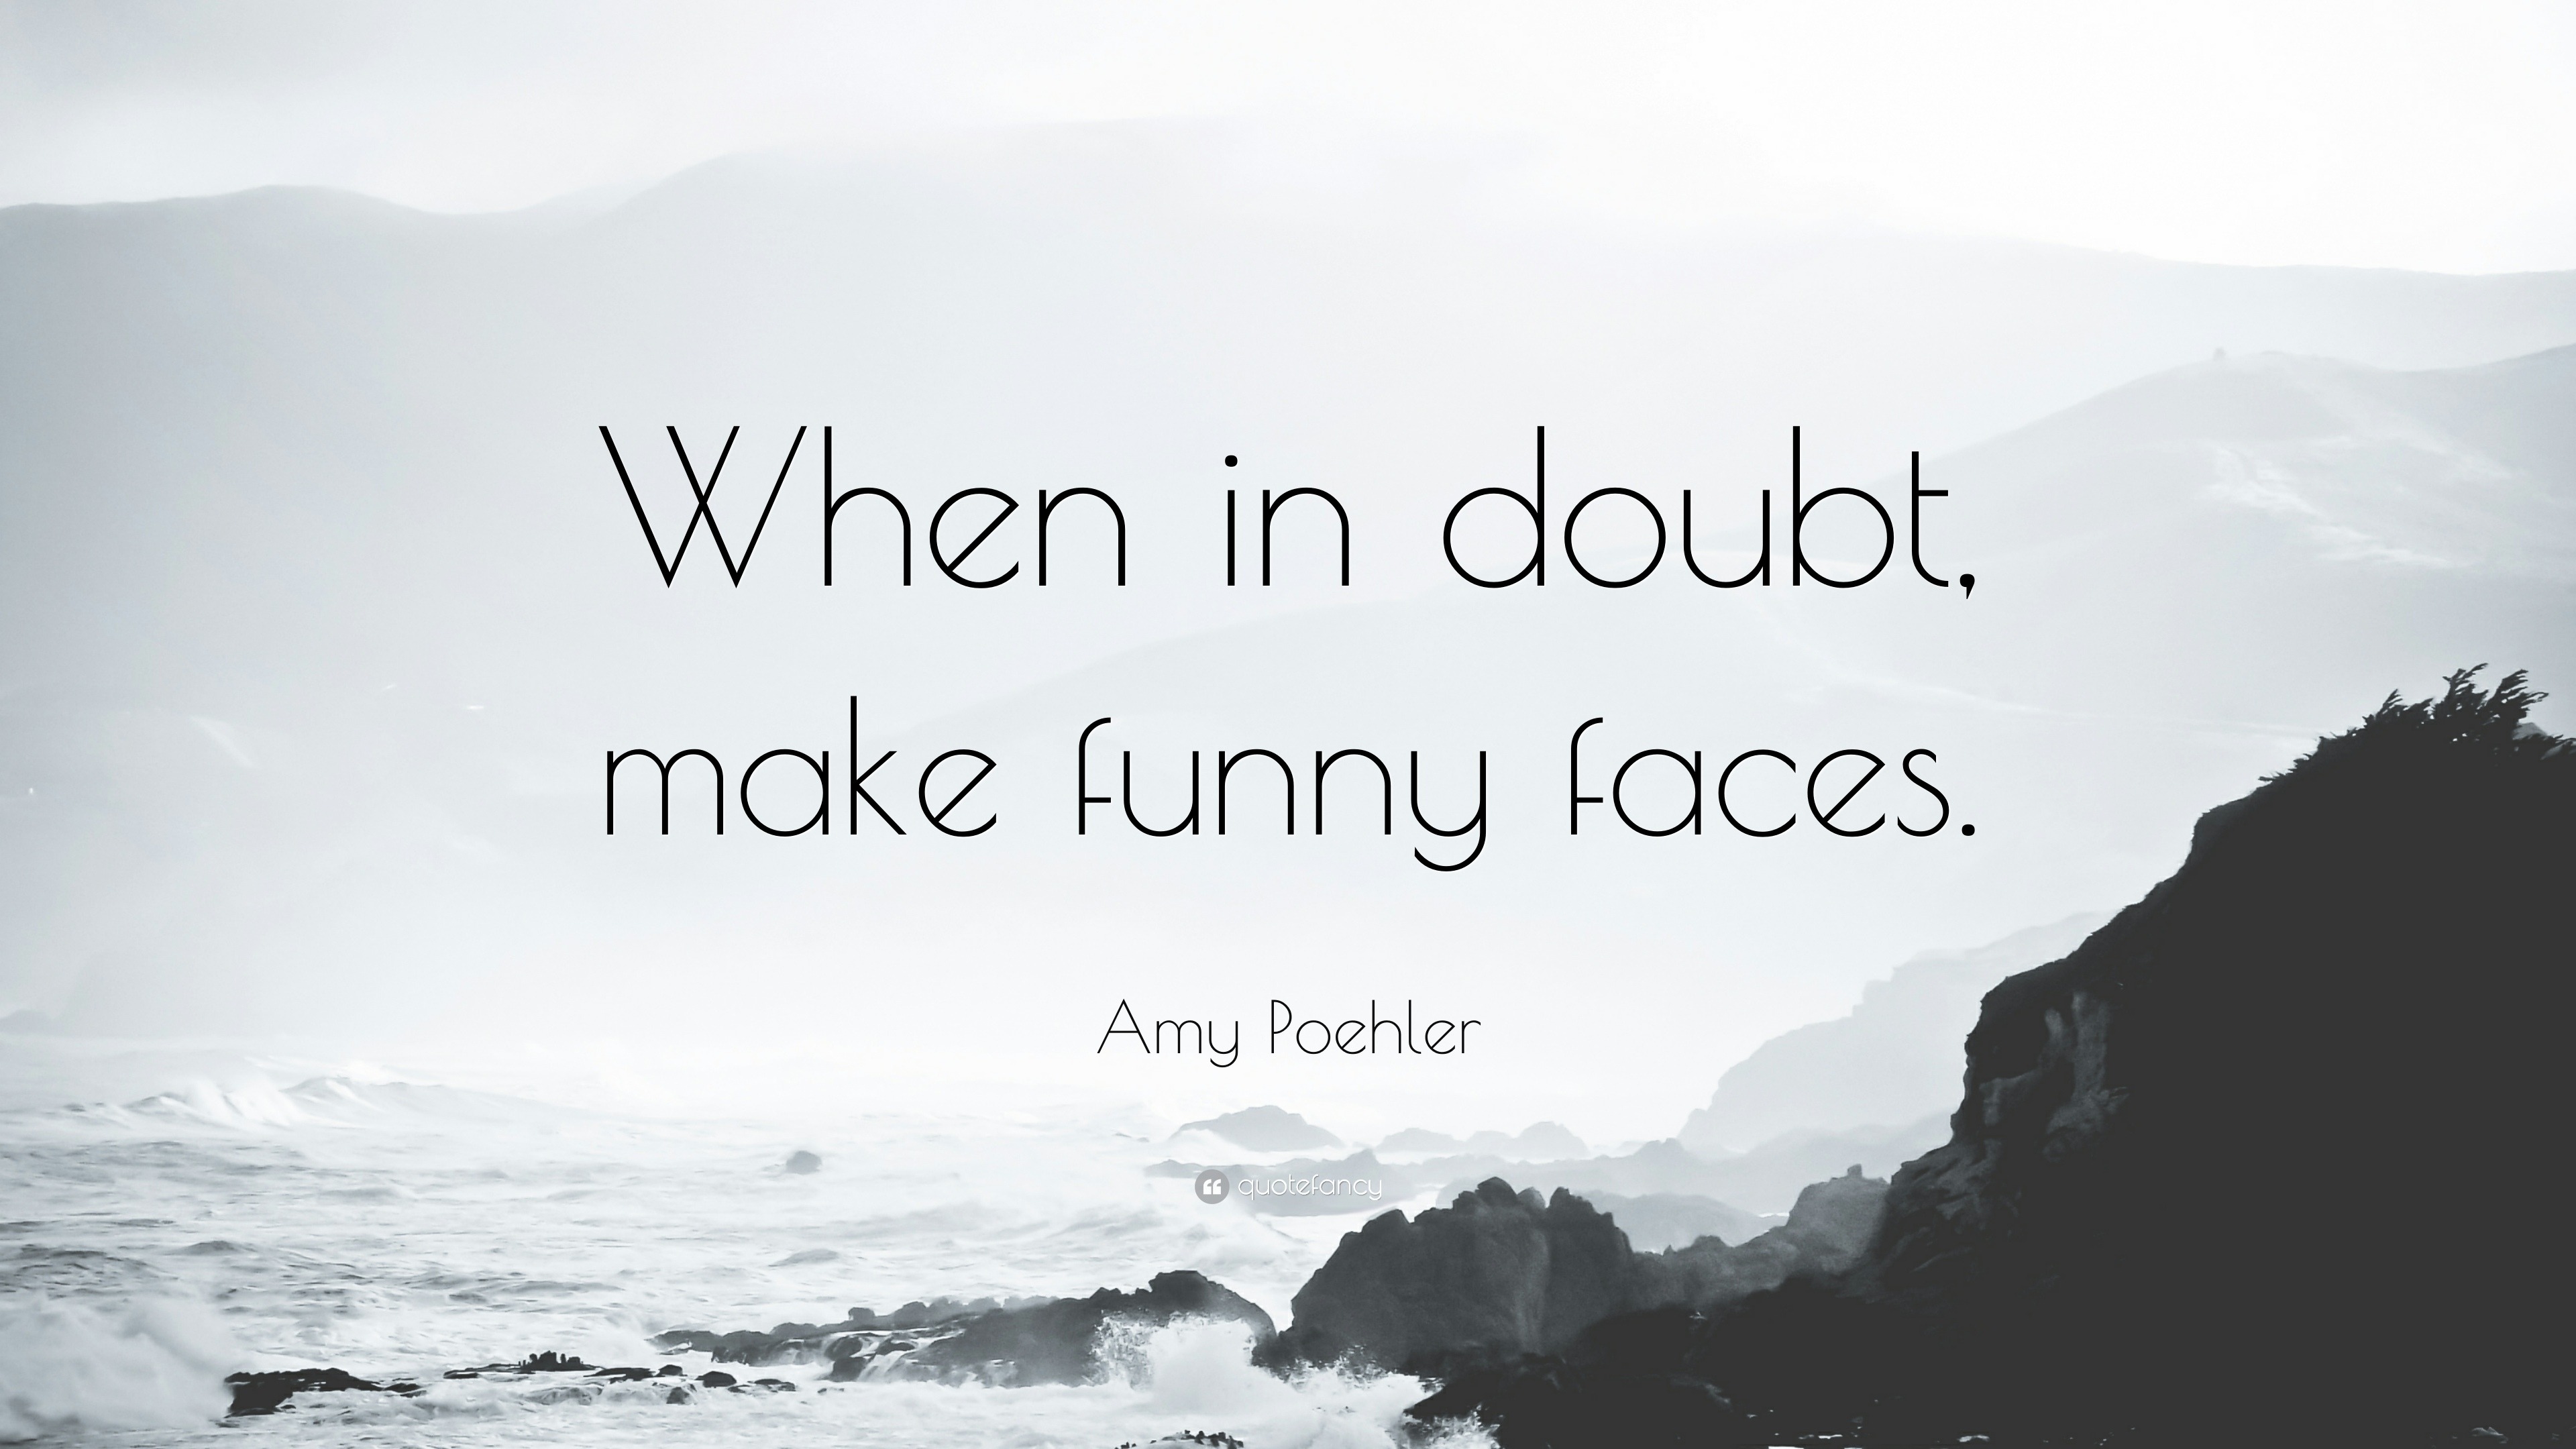 Amy Poehler Quote: “When in doubt, make funny faces.”